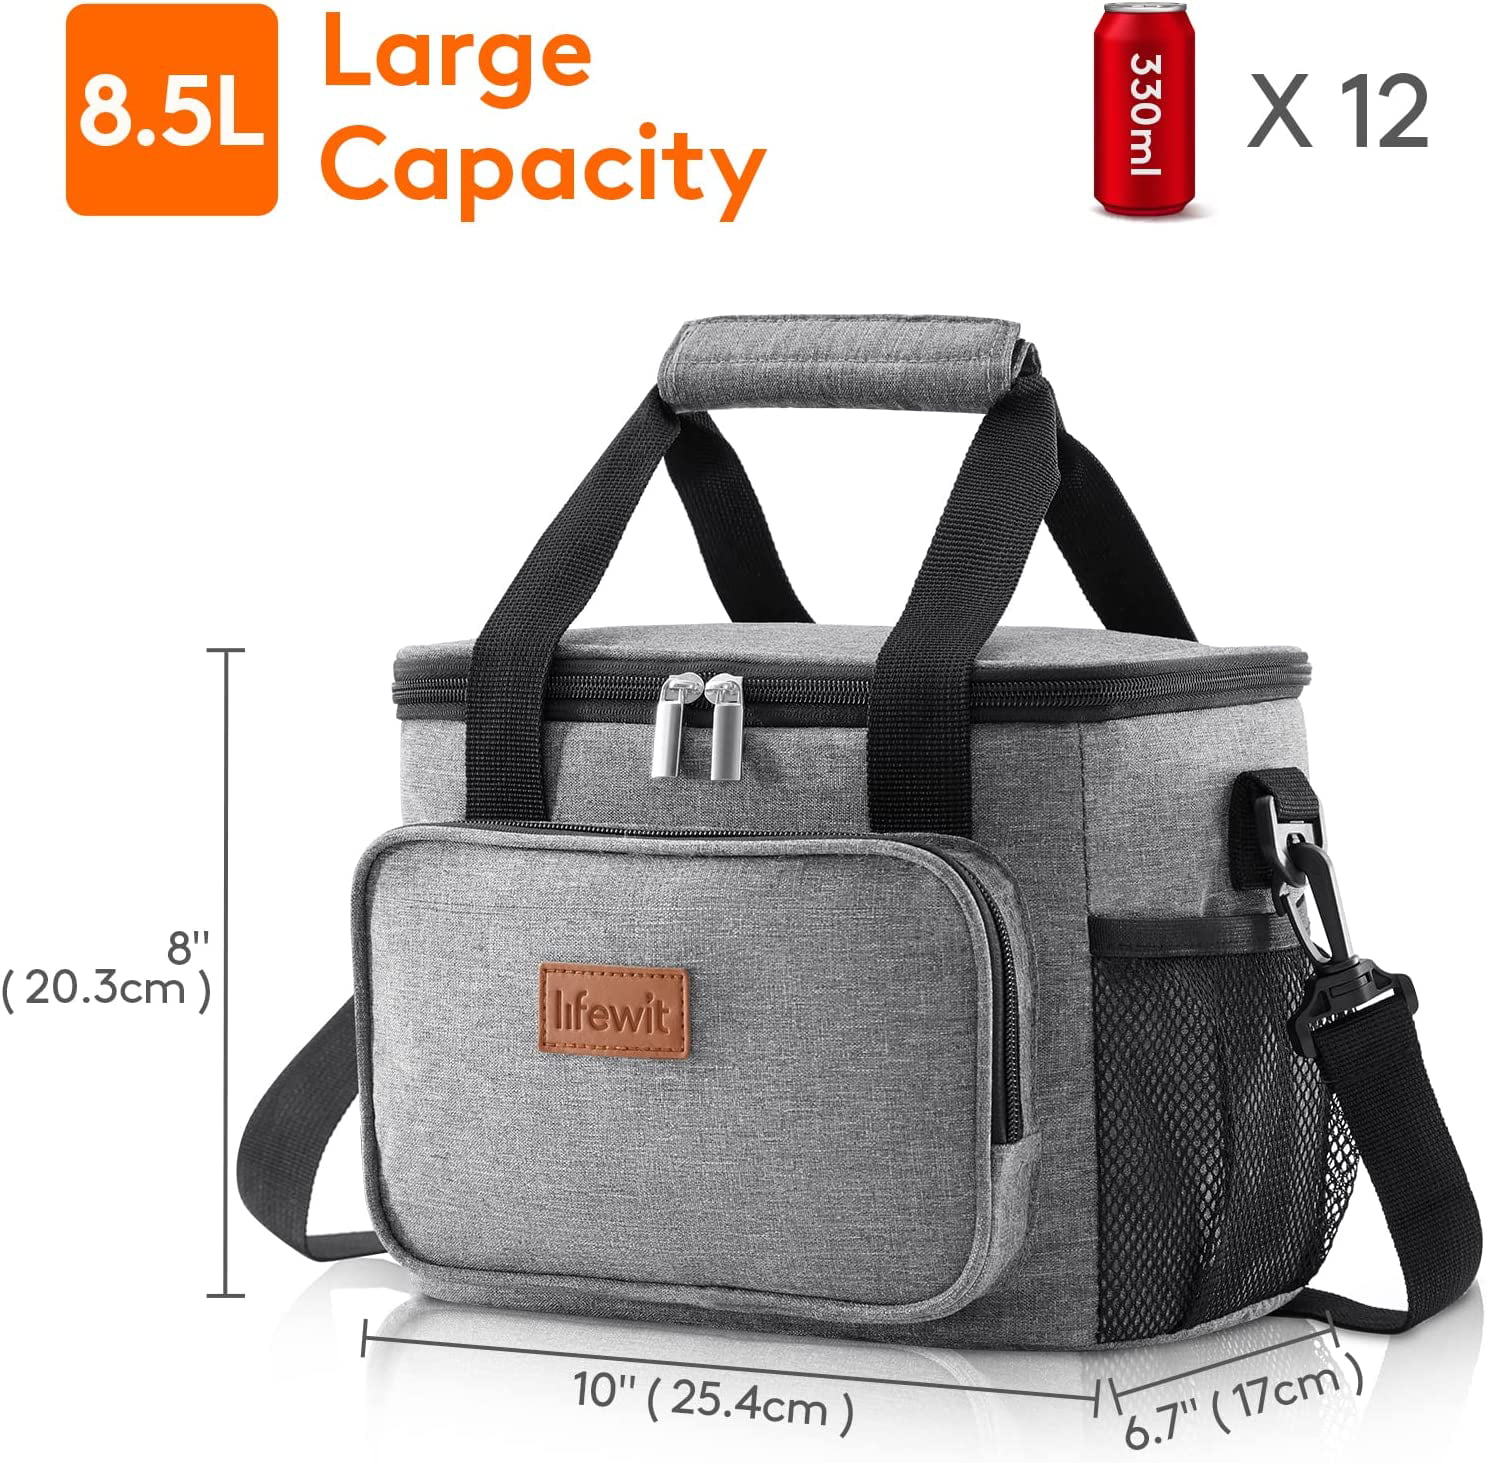 Lifewit 12-Can (8.5L) Large Lunch Bag Insulated Lunch Box Soft Cooler, Gray  Shoulder strap 